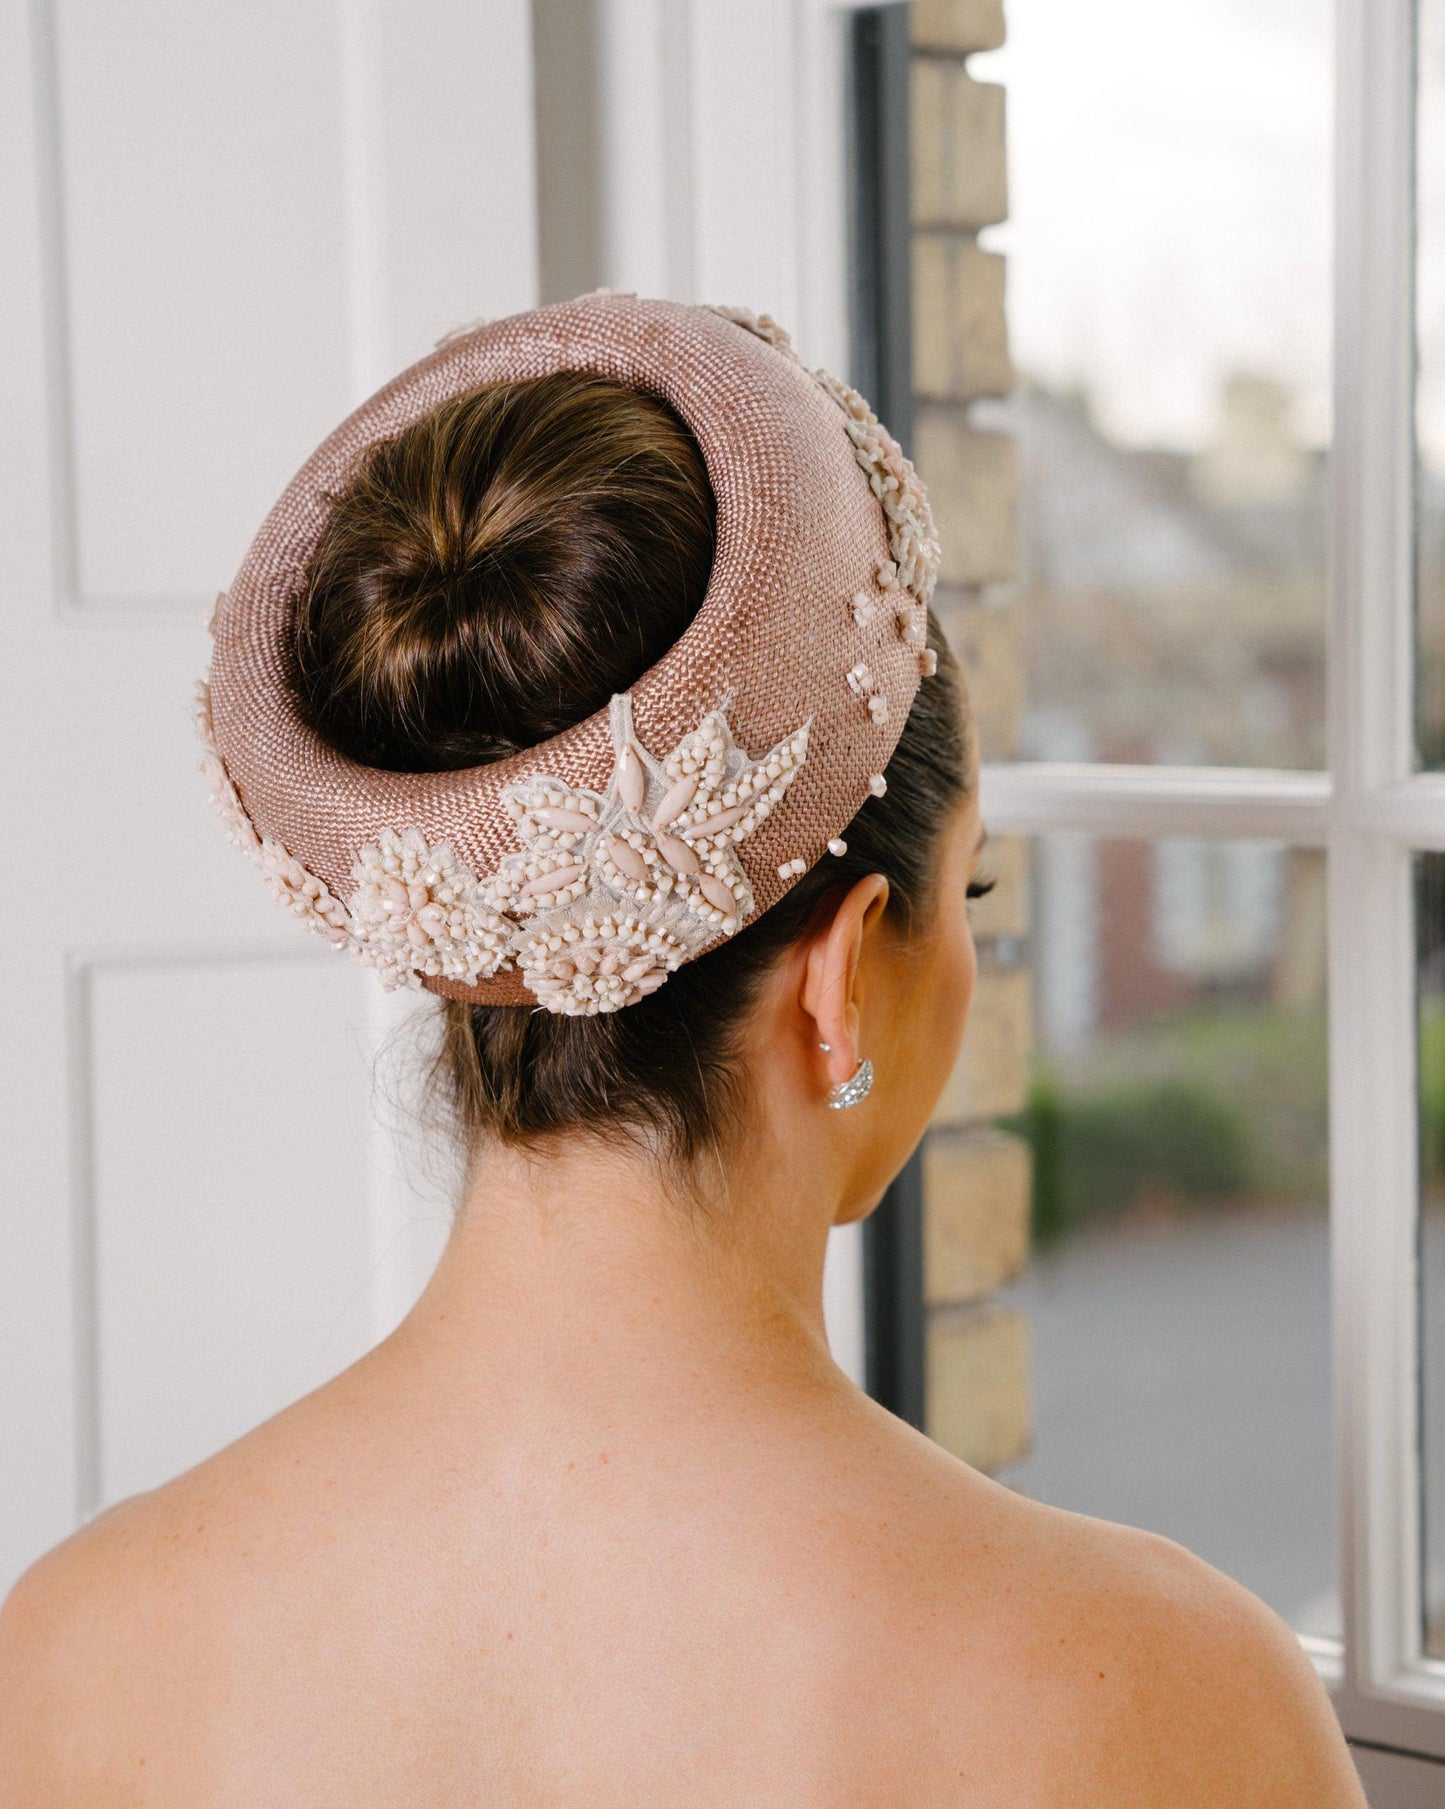 Pale Pink Ring Hat 1950's style